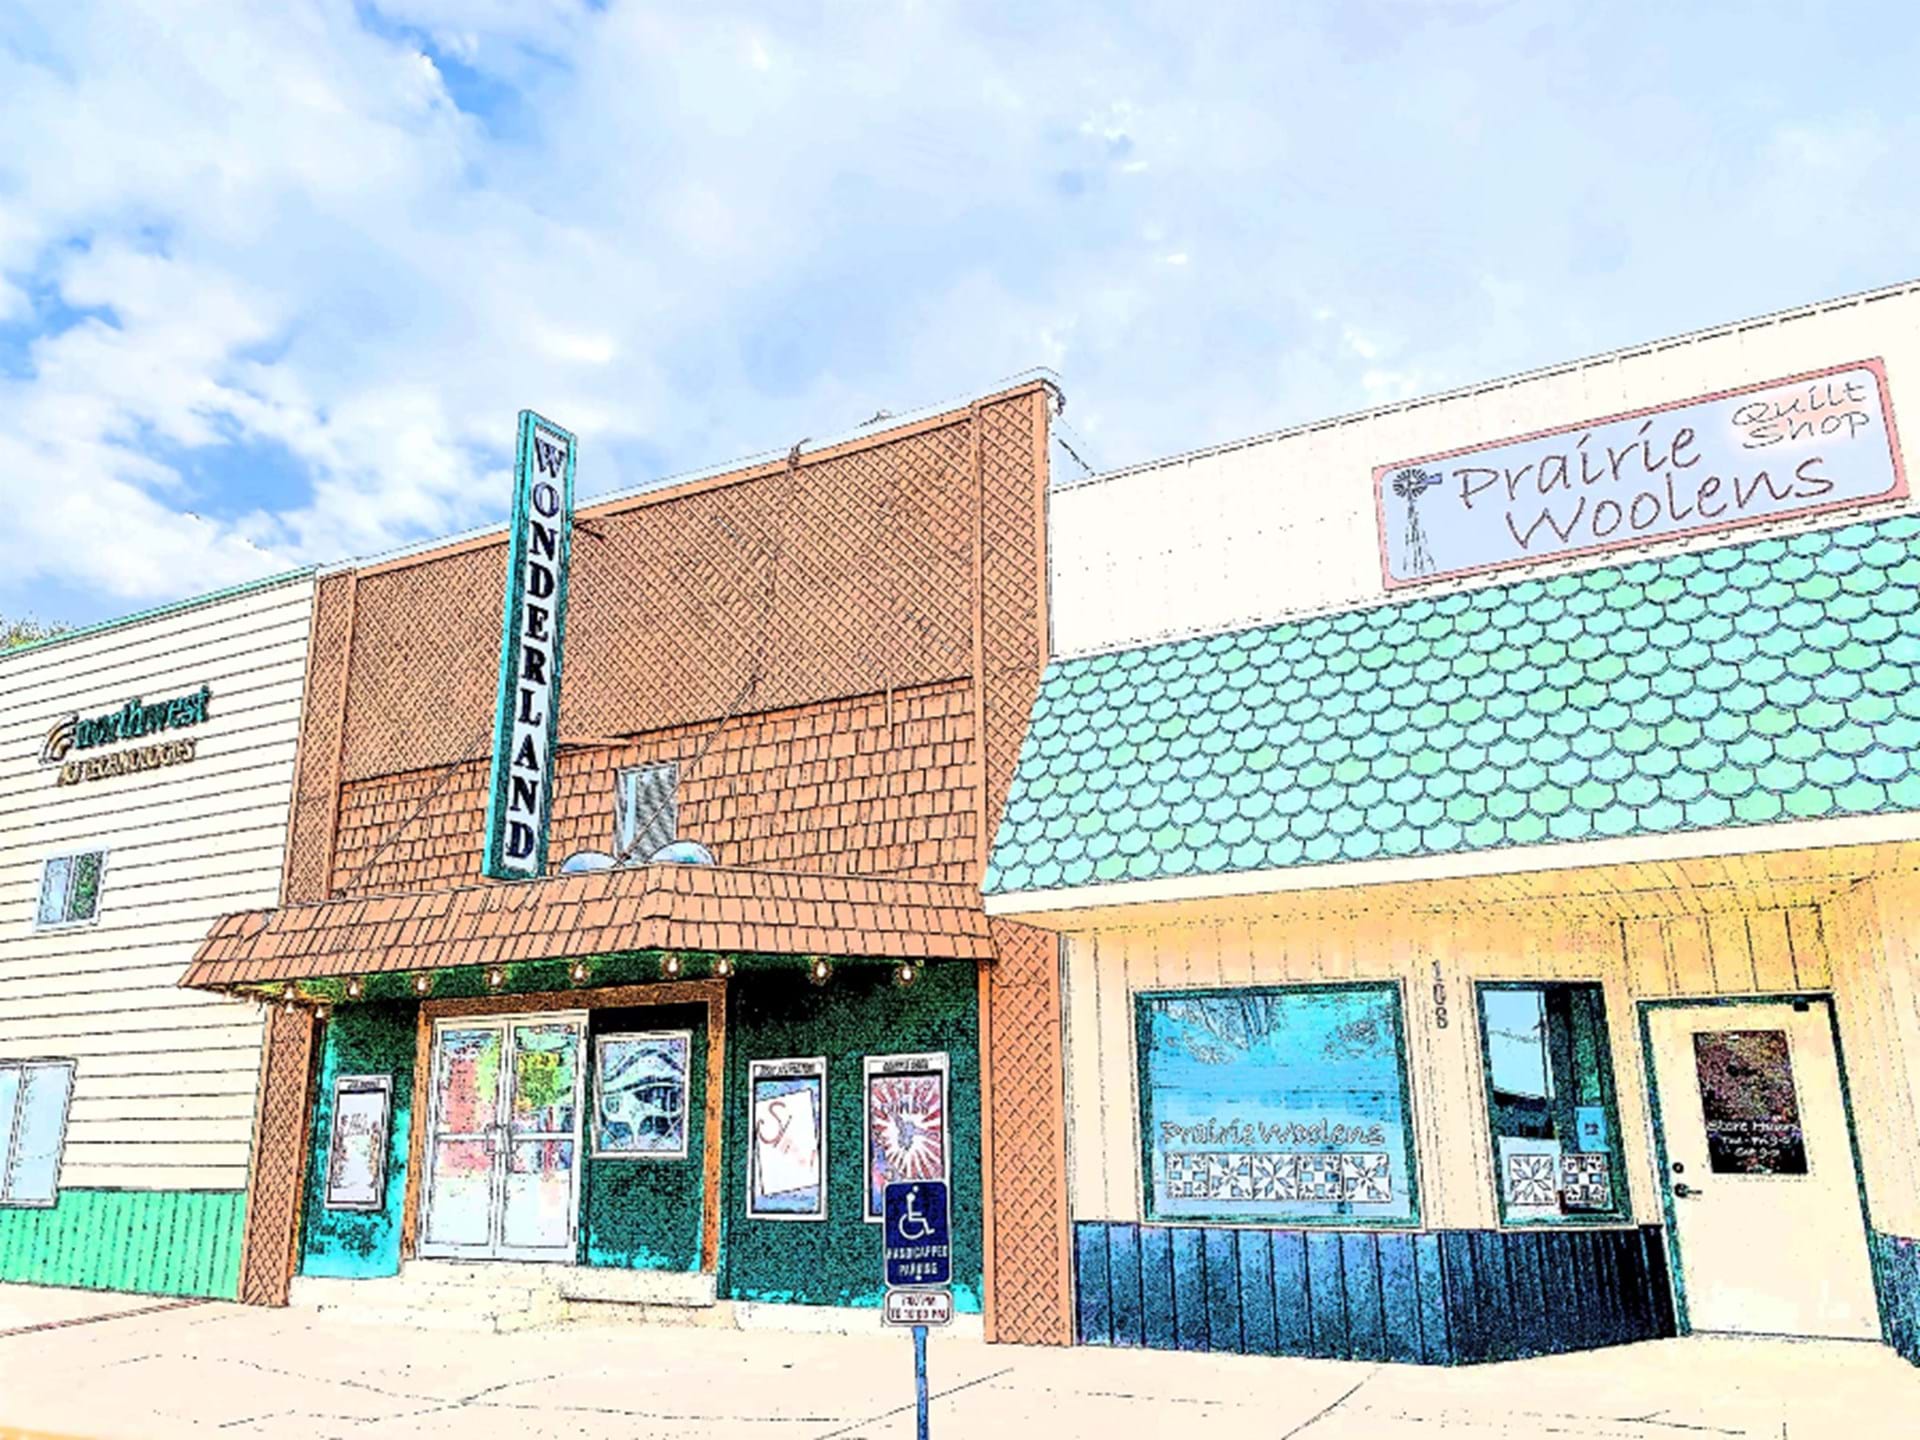 Built in 1910, the Wonderland Theater in downtown Paullina is still in operation on weekends!